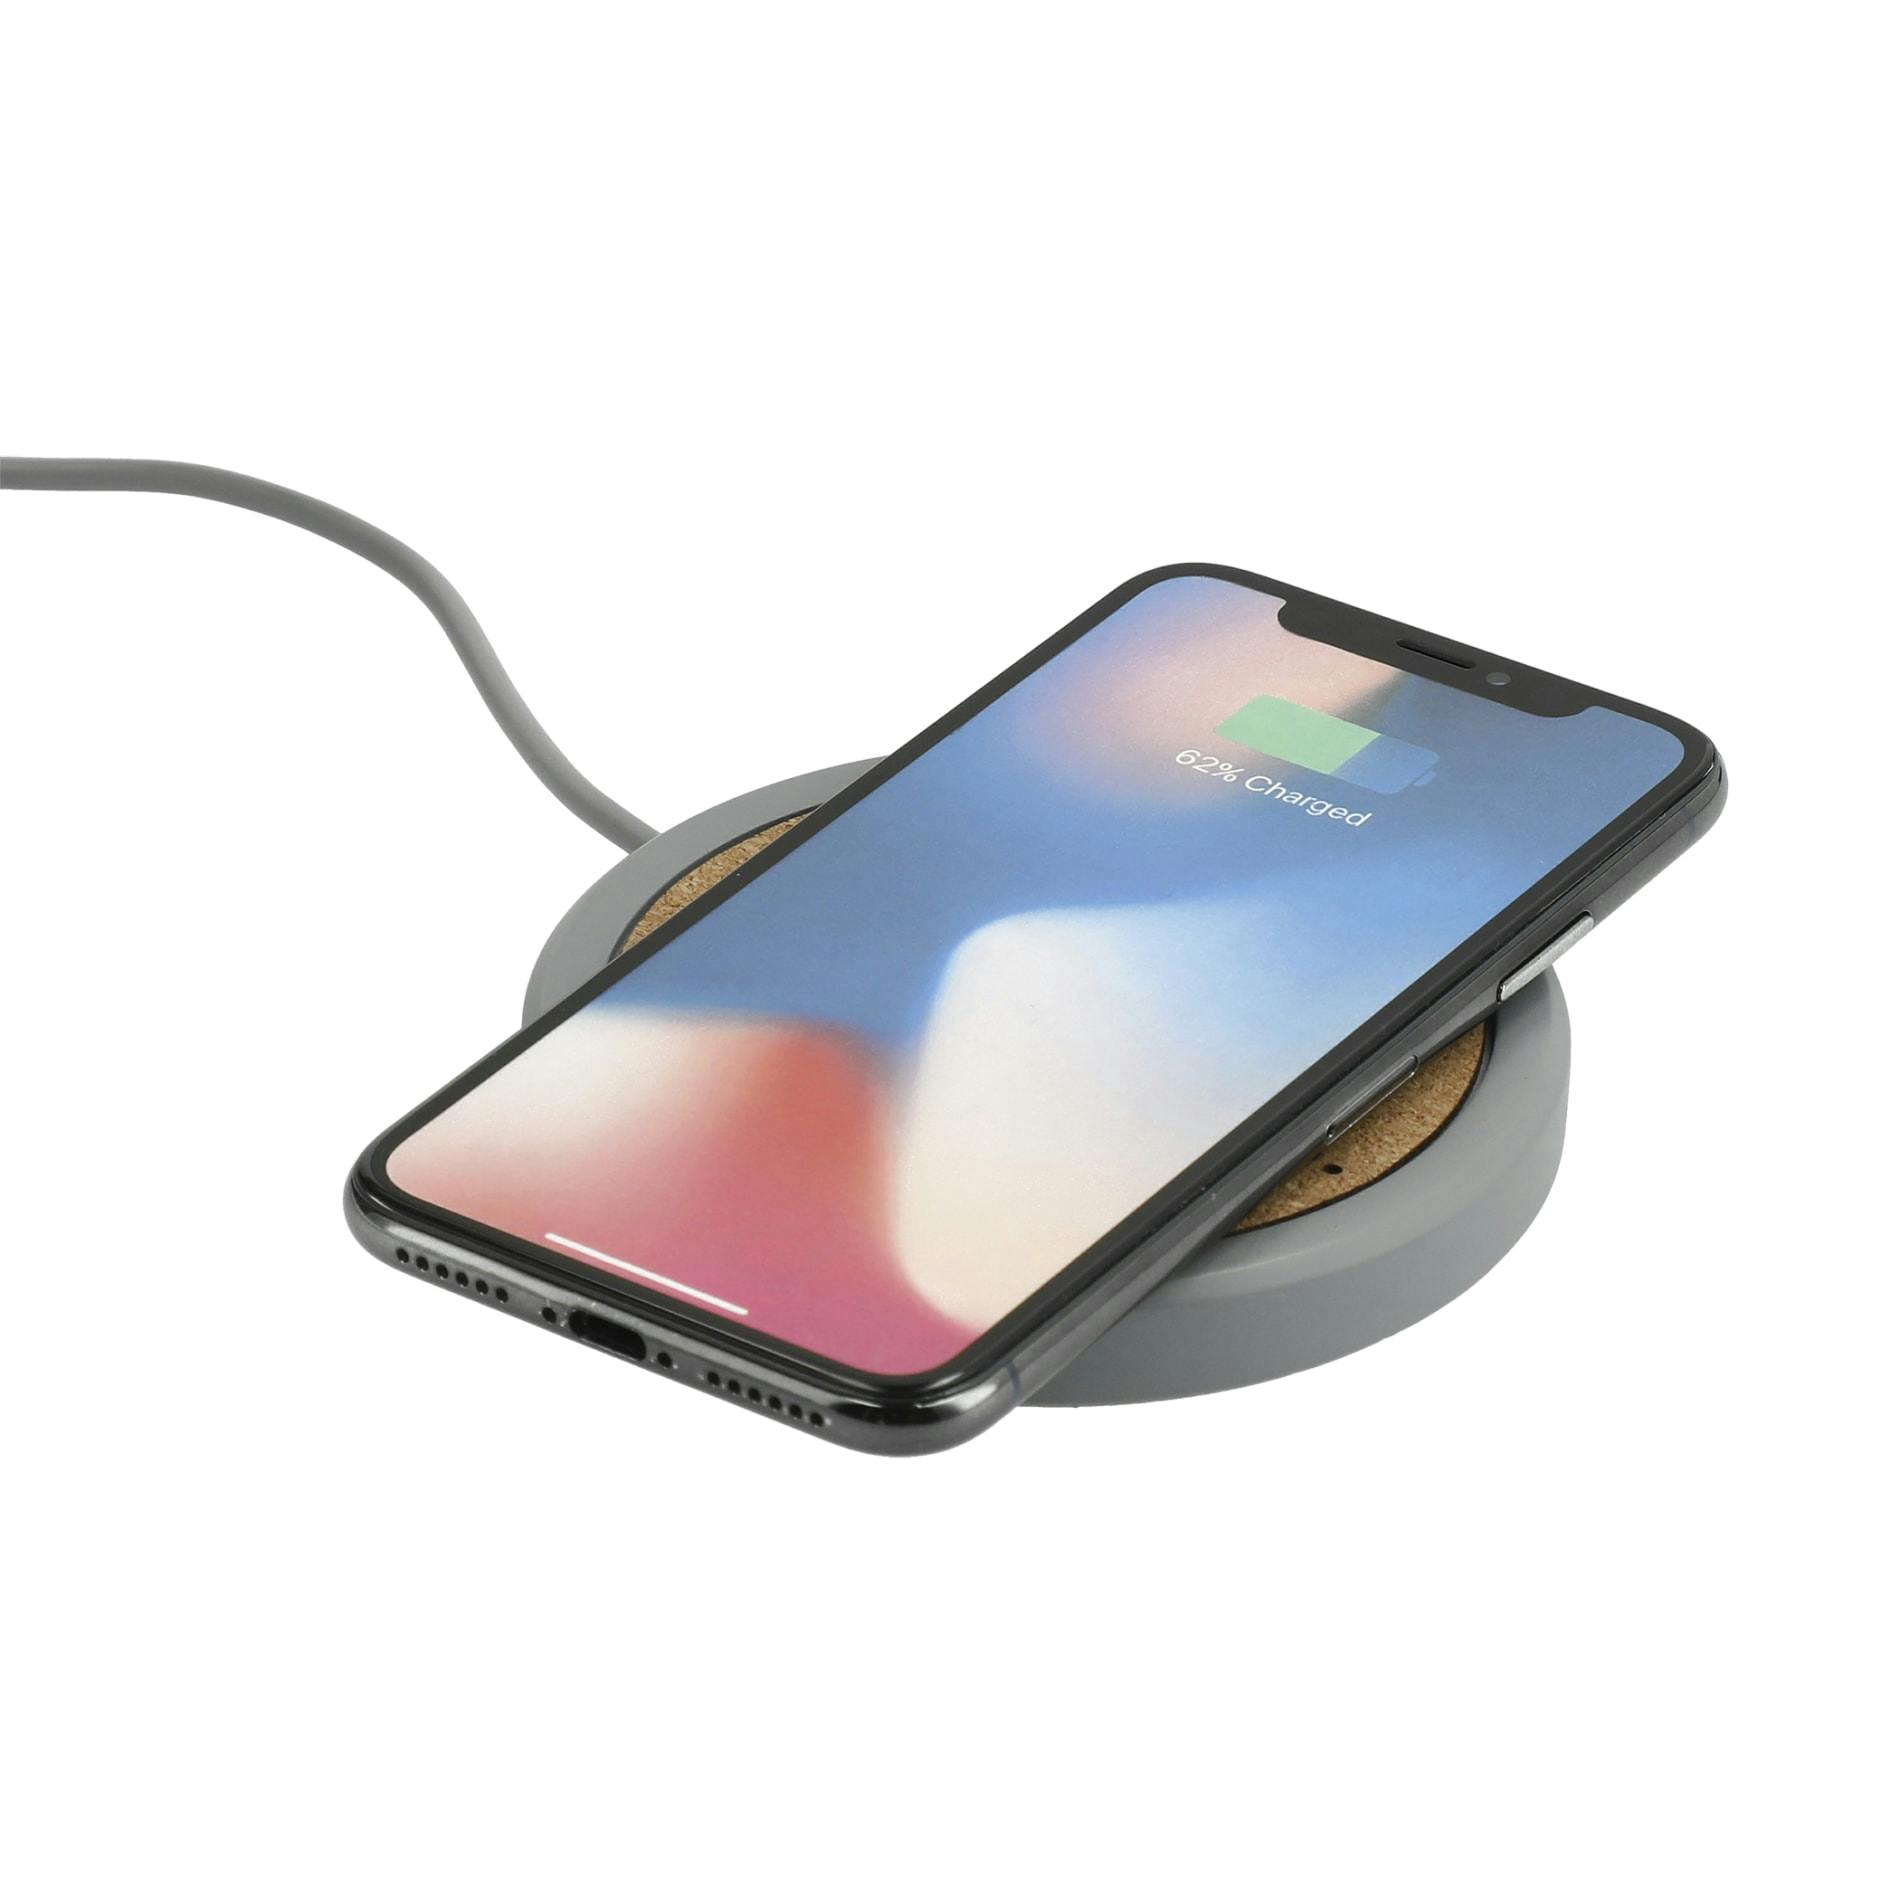 Set in Stone Fast Wireless Charging Pad - additional Image 5